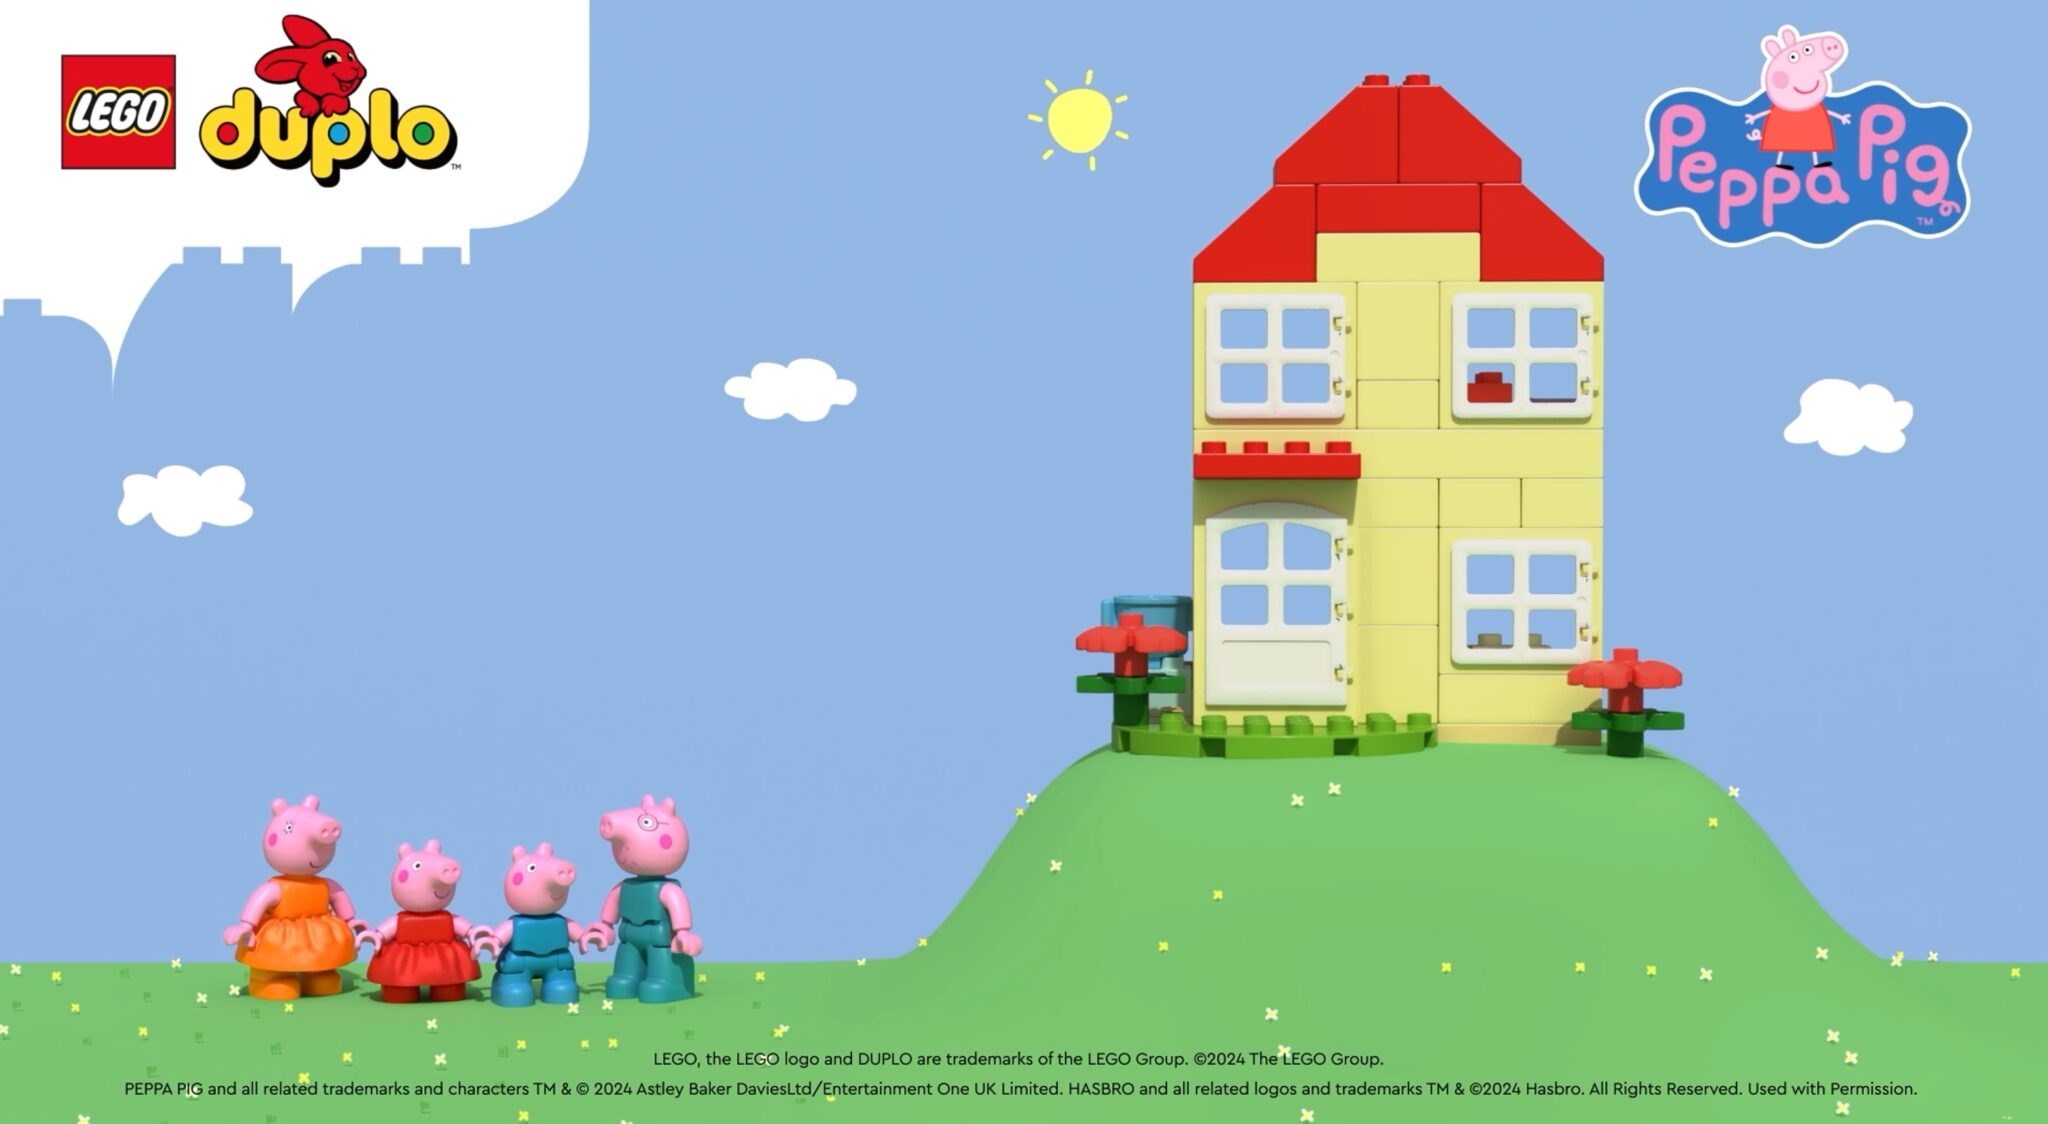 LEGO DUPLO Peppa Pig Officially Announced - The Brick Fan